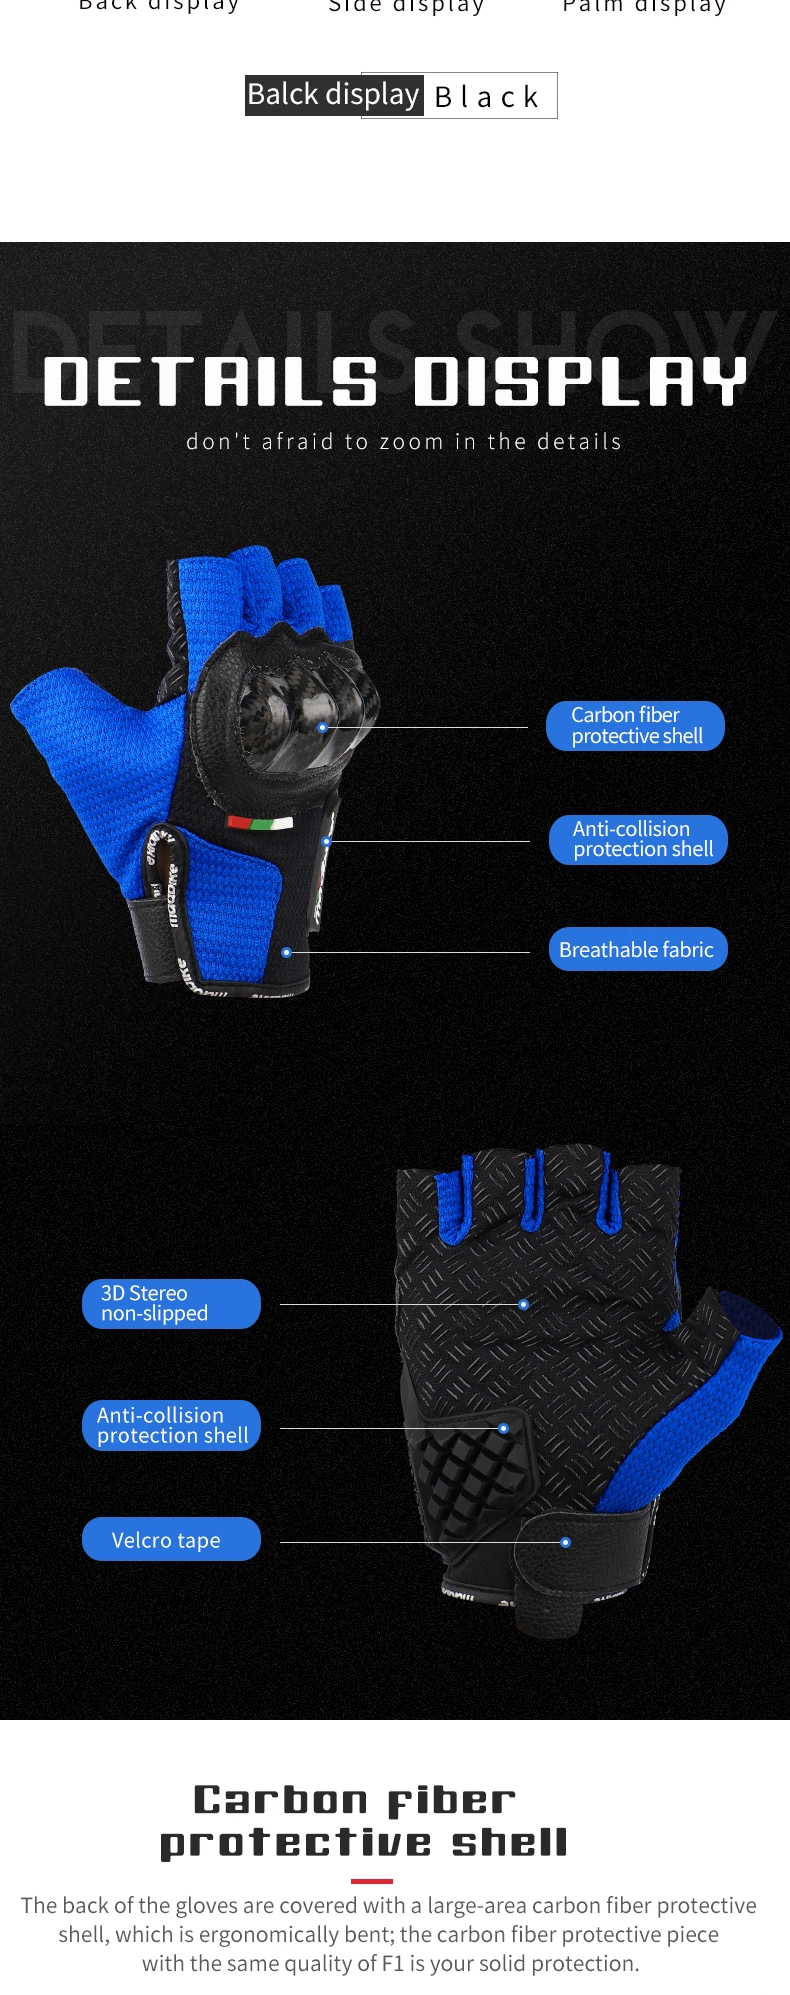 Hot Sale Motorcycle Riding Gloves Motocross Breathable Half Finger Motorcycle Hand Bicycle Gloves Racing Fingerless Gloves